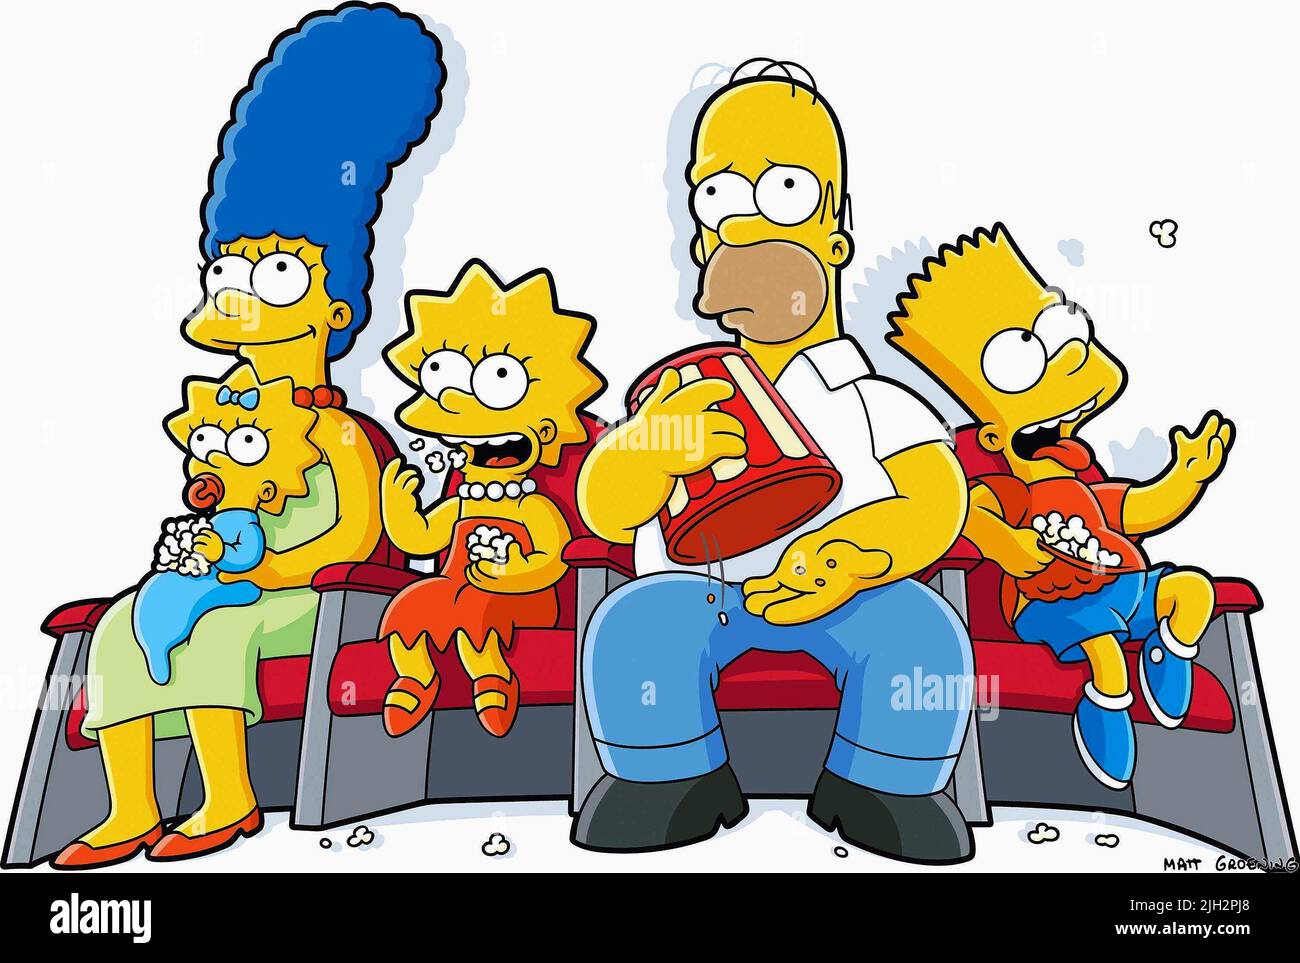 MAGGIE,MARGE,LISA,HOMER,SIMPSON, THE SIMPSONS MOVIE, 2007 Stock Photo